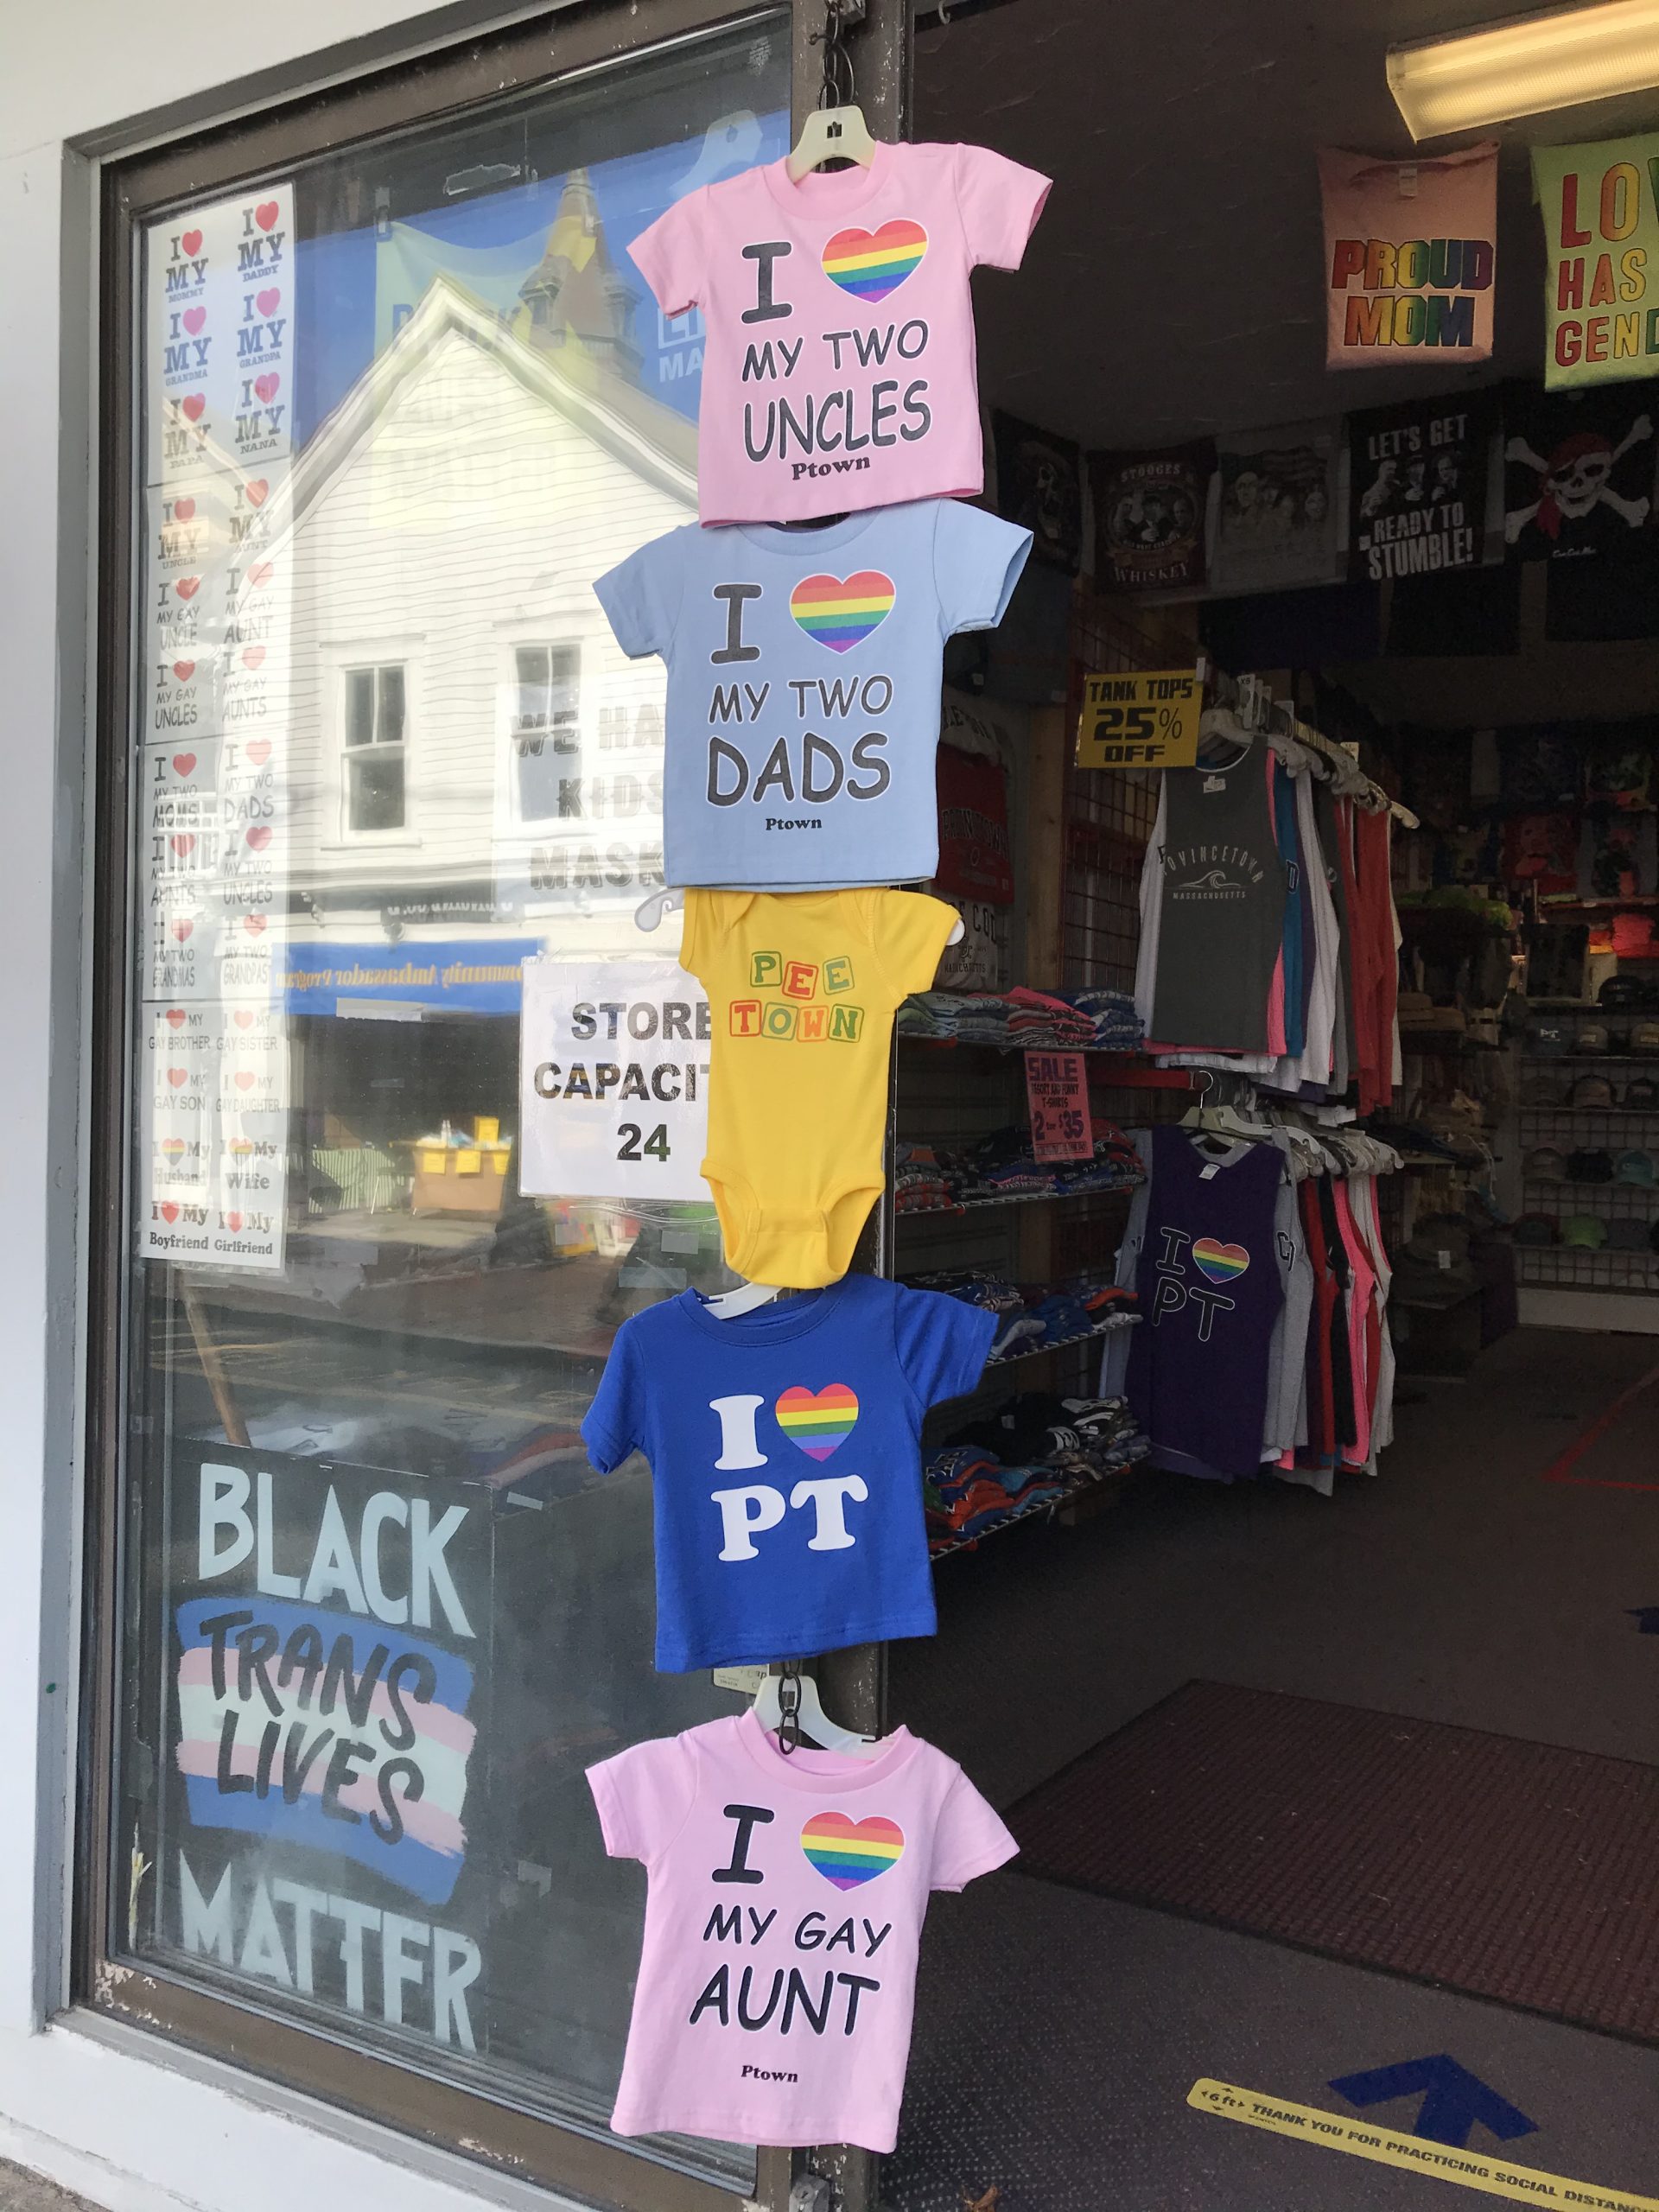 T-shirt store with t-shirt sayings on them that affirm gay people's humanity